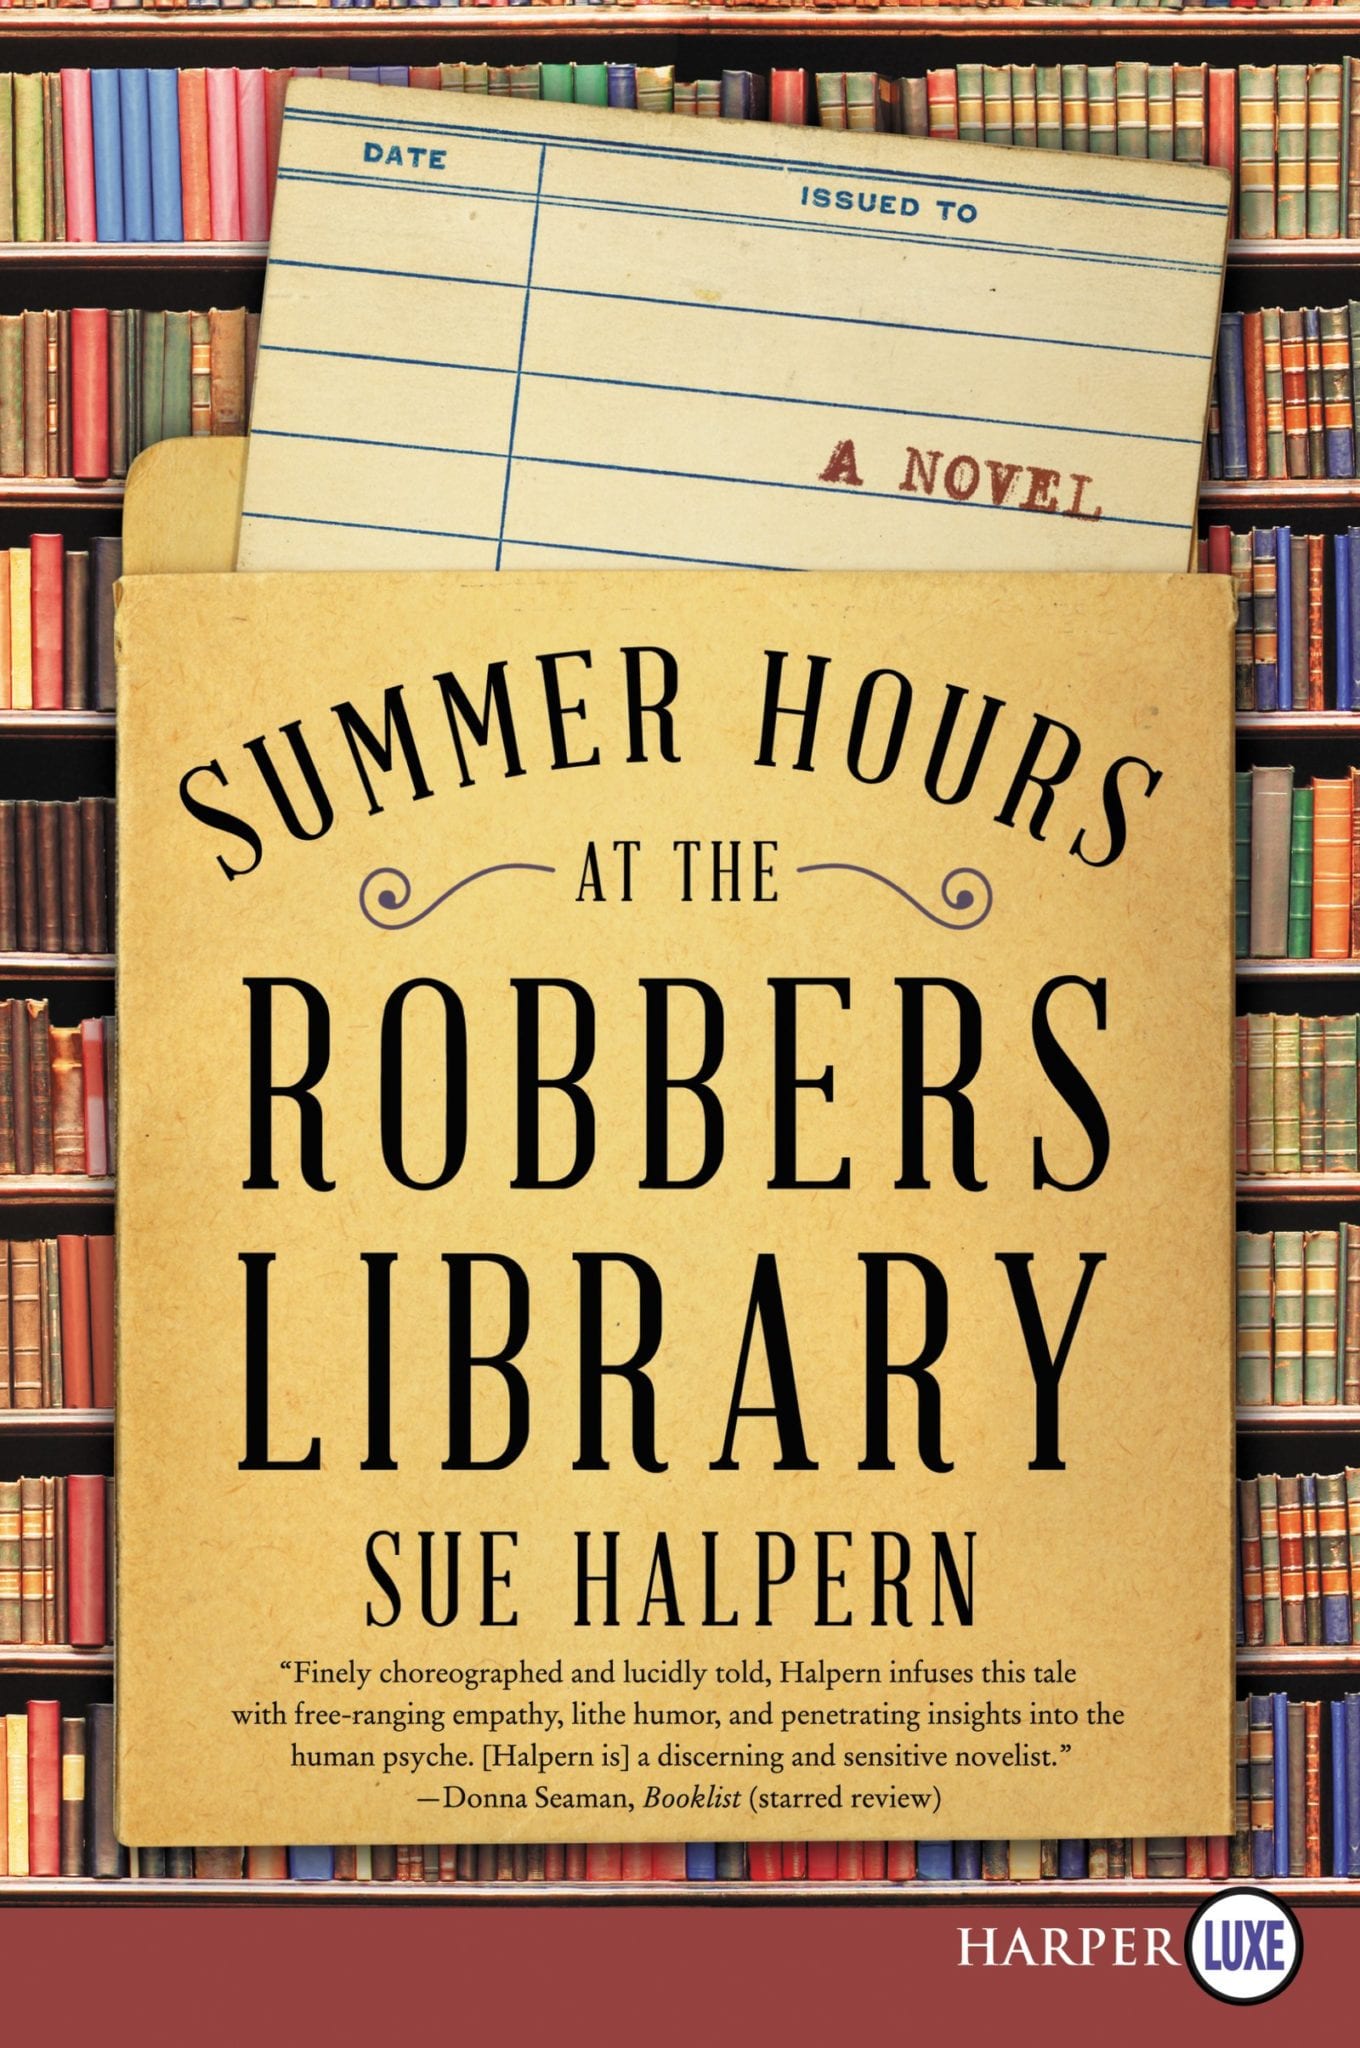 Summer Hours at Robbers Library by Sue Halpern